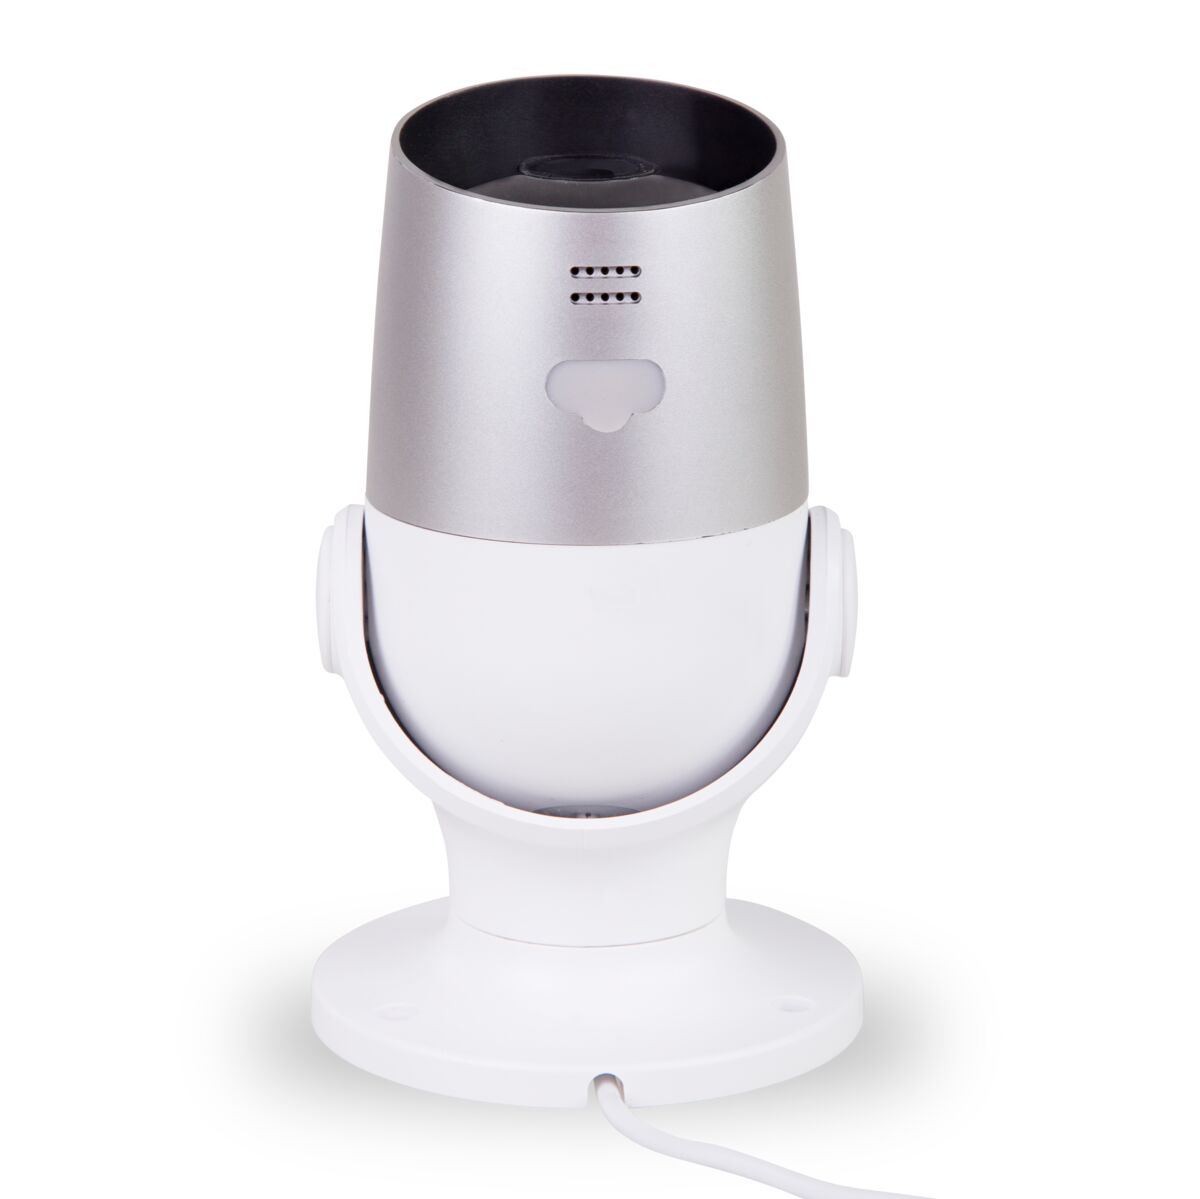 View MO - Wi-Fi camera outdoor - Front View Image | Marmitek